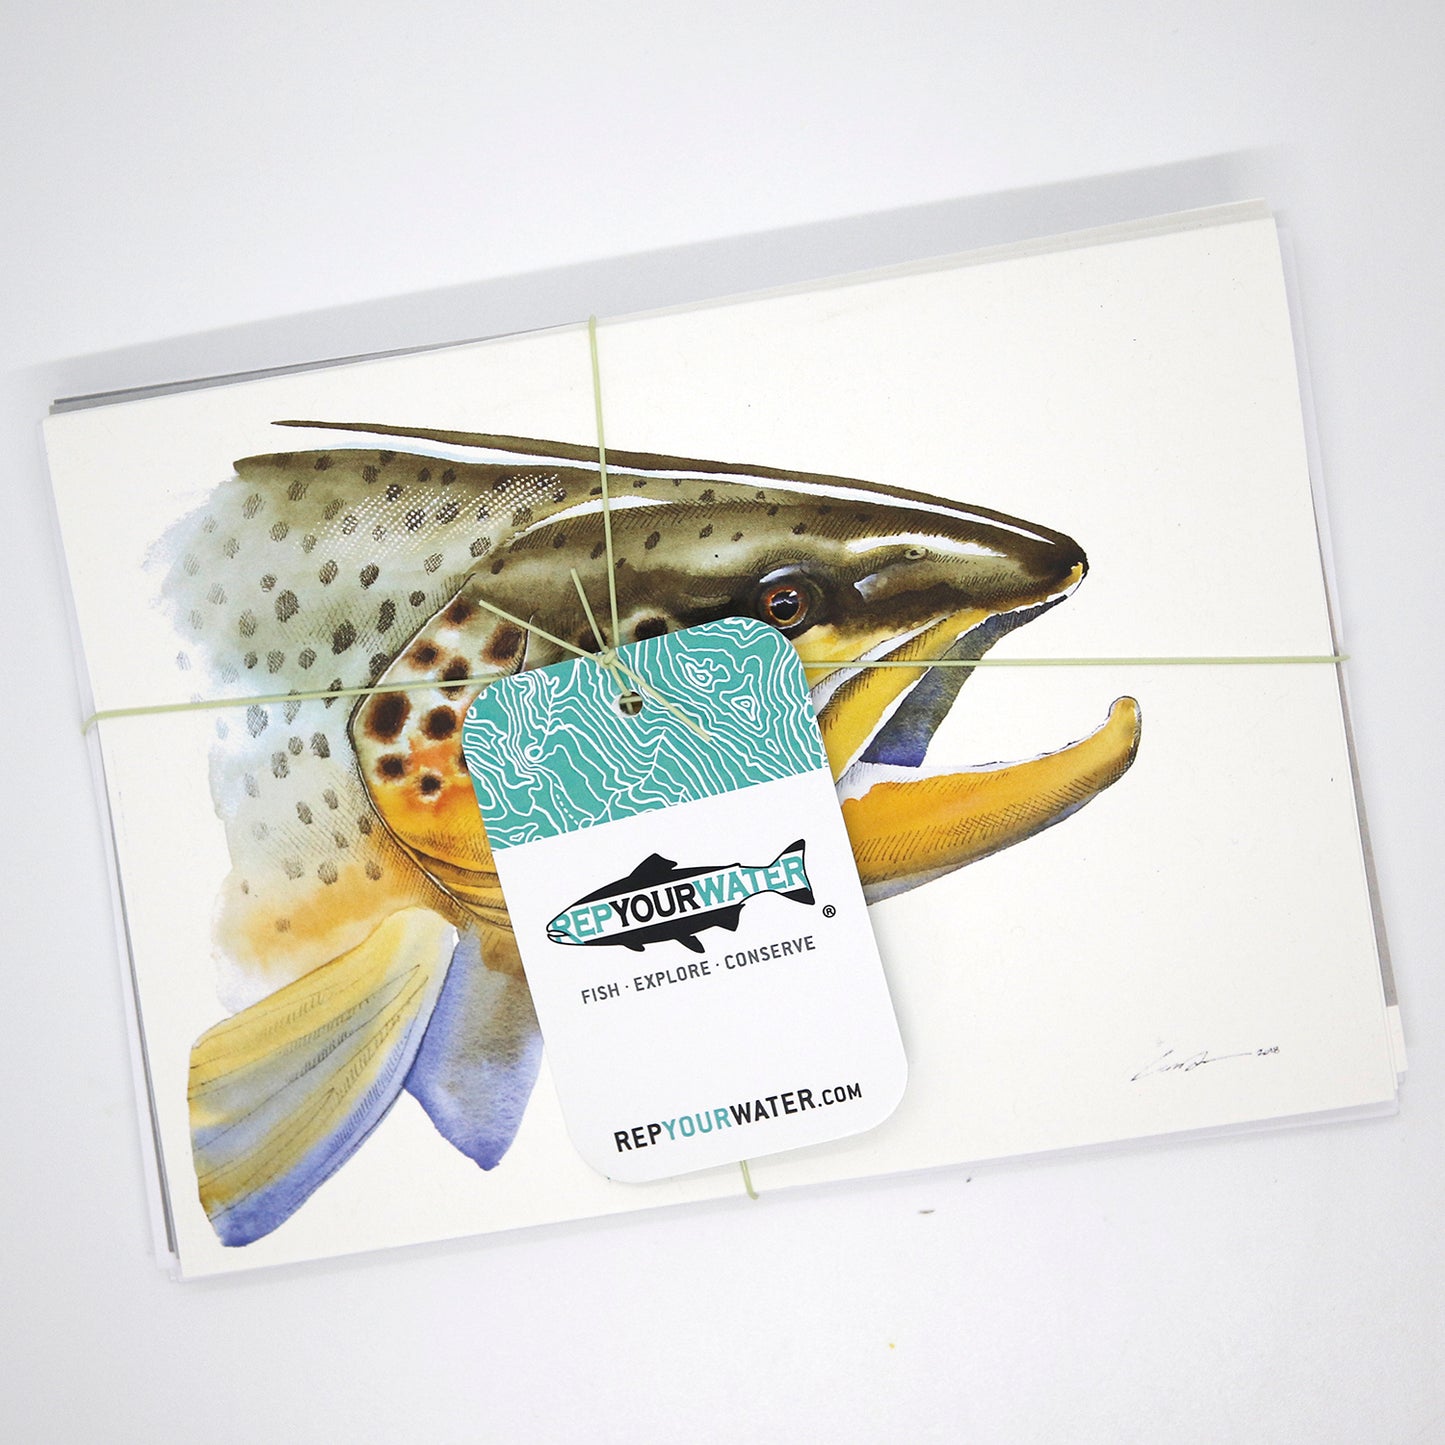 One stack of greeting cards with the same hangtag in the first image.  This only shows a brown trouts head on a greeting card